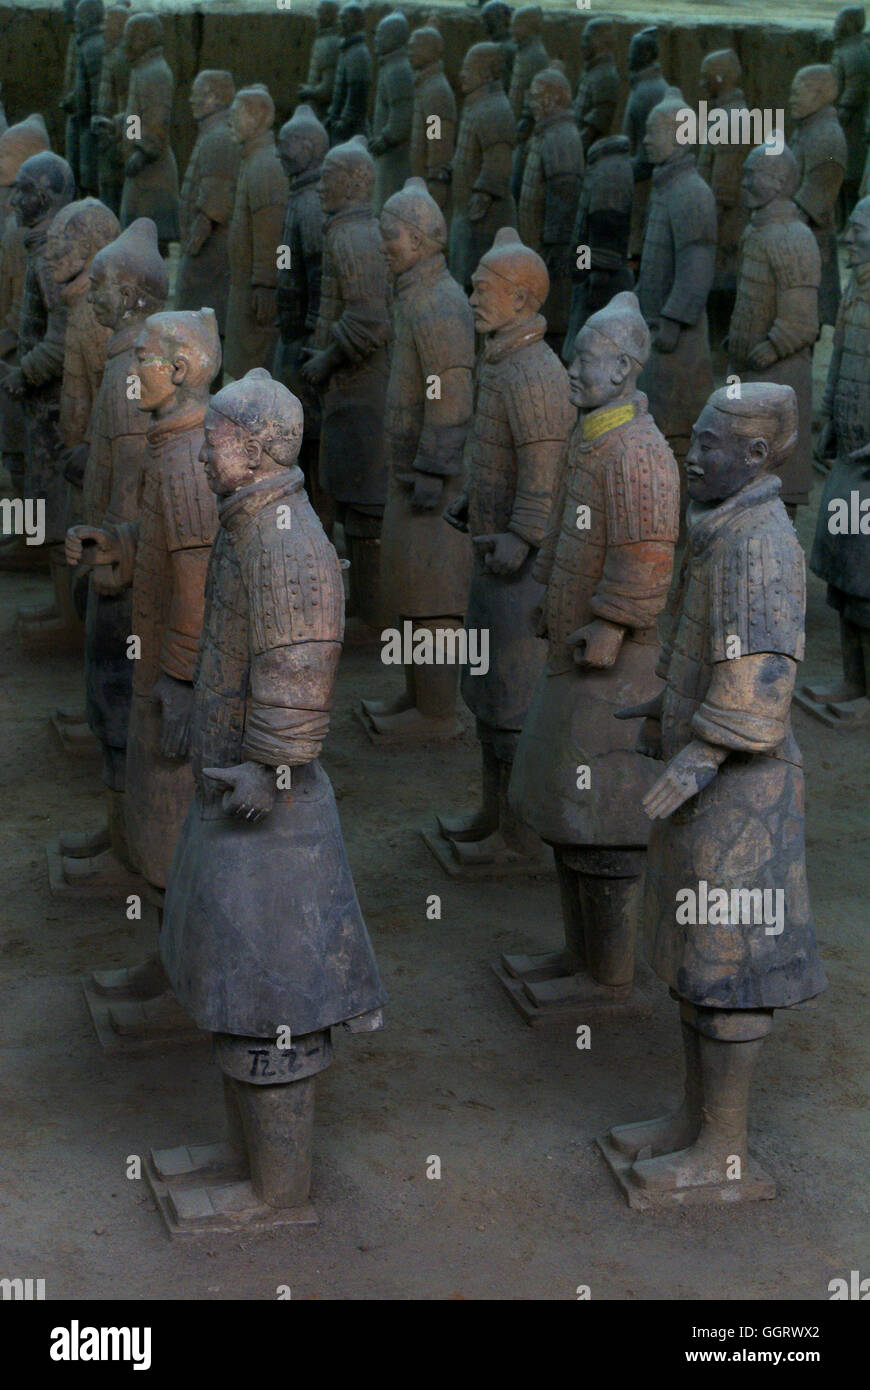 The Terracotta Army Is Sculptures Of Depicting The Army Of Qin Shi Huang The First Emperor Of